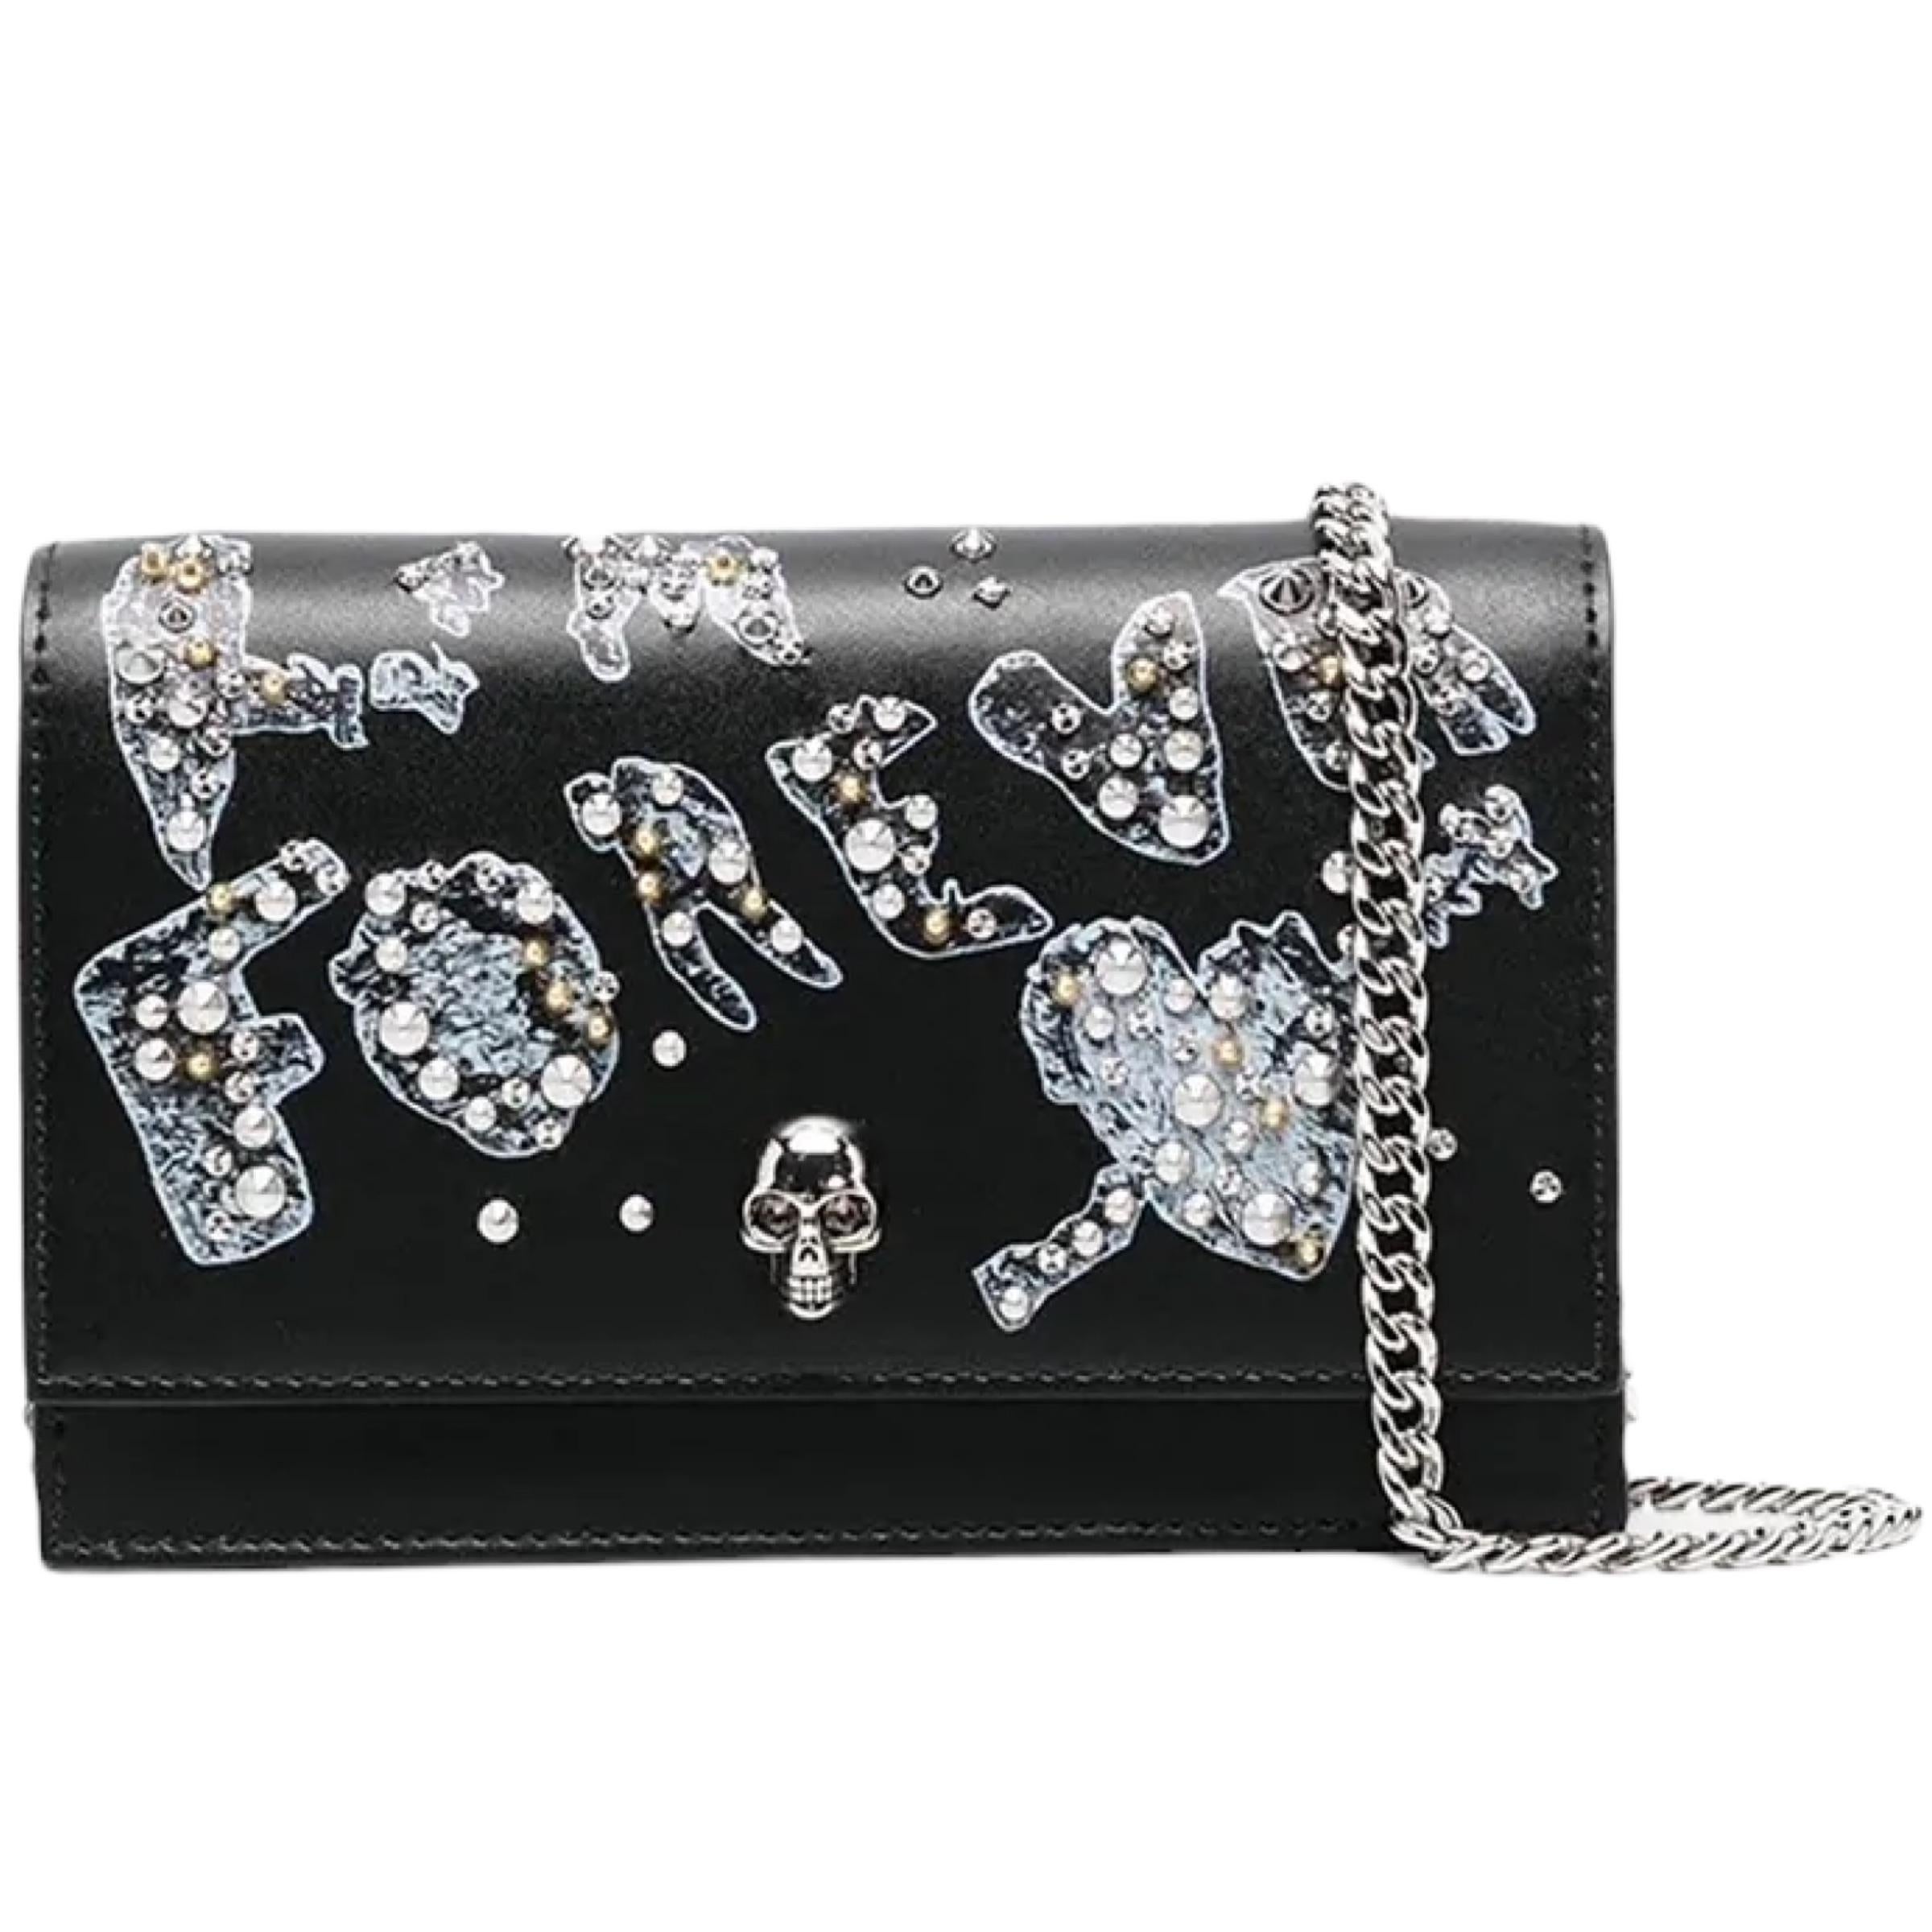 New Alexander McQueen Black Mini Skull Studded Leather Crossbody Bag In New Condition For Sale In San Marcos, CA